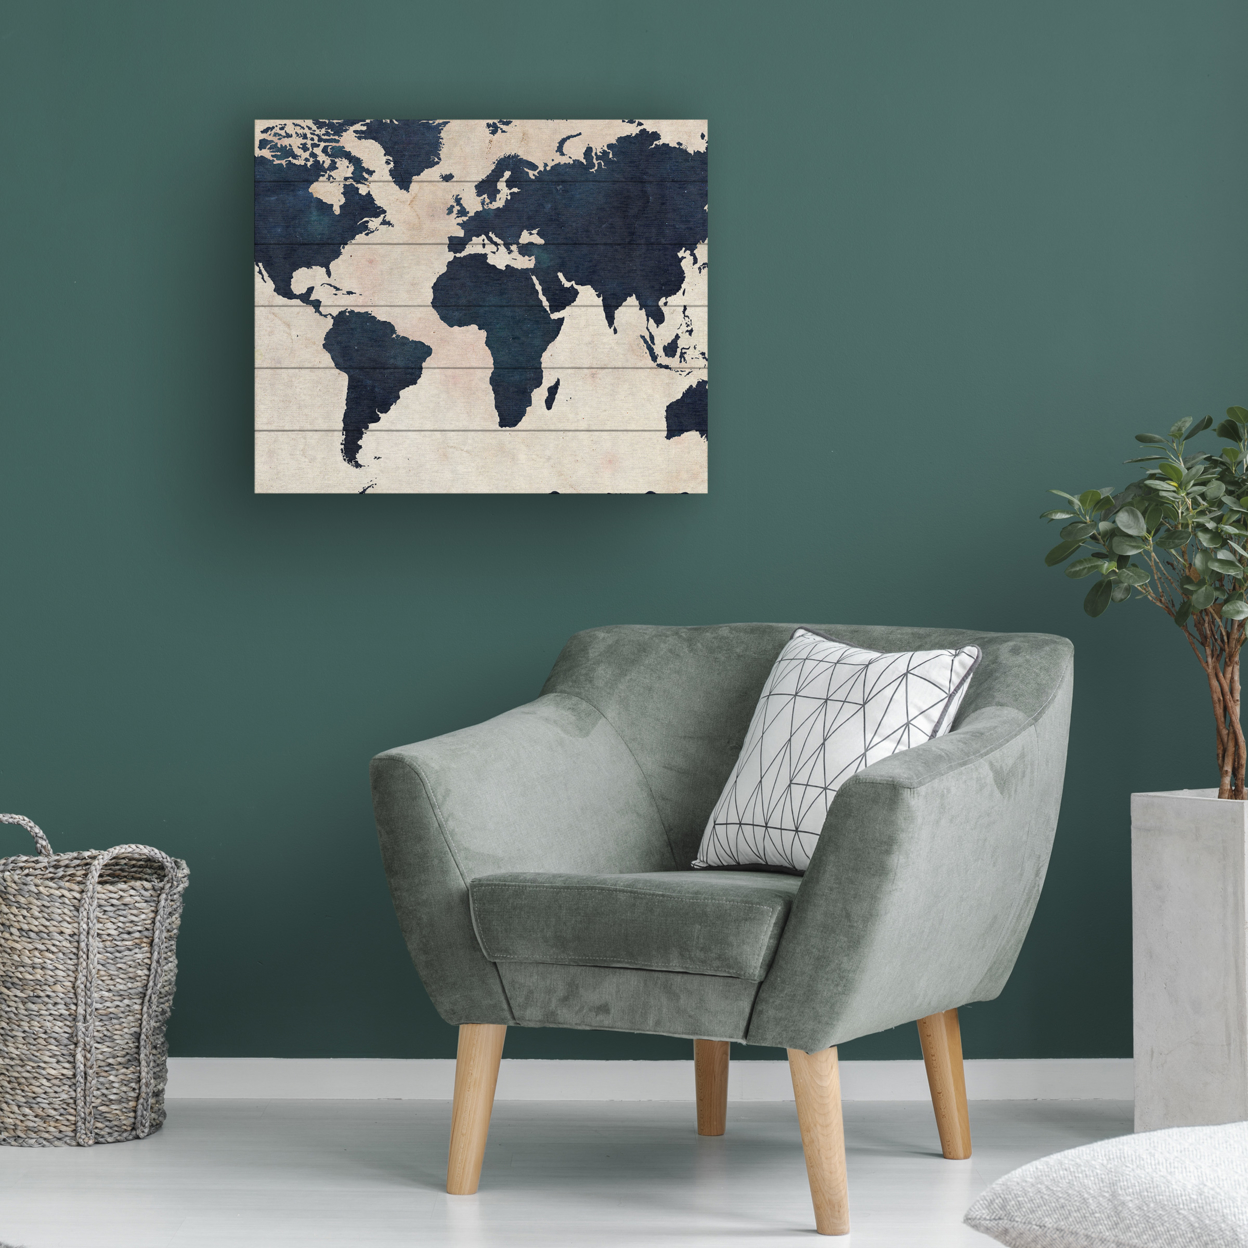 Wooden Slat Art 18 X 22 Inches Titled World Map -Navy Ready To Hang Home Decor Picture